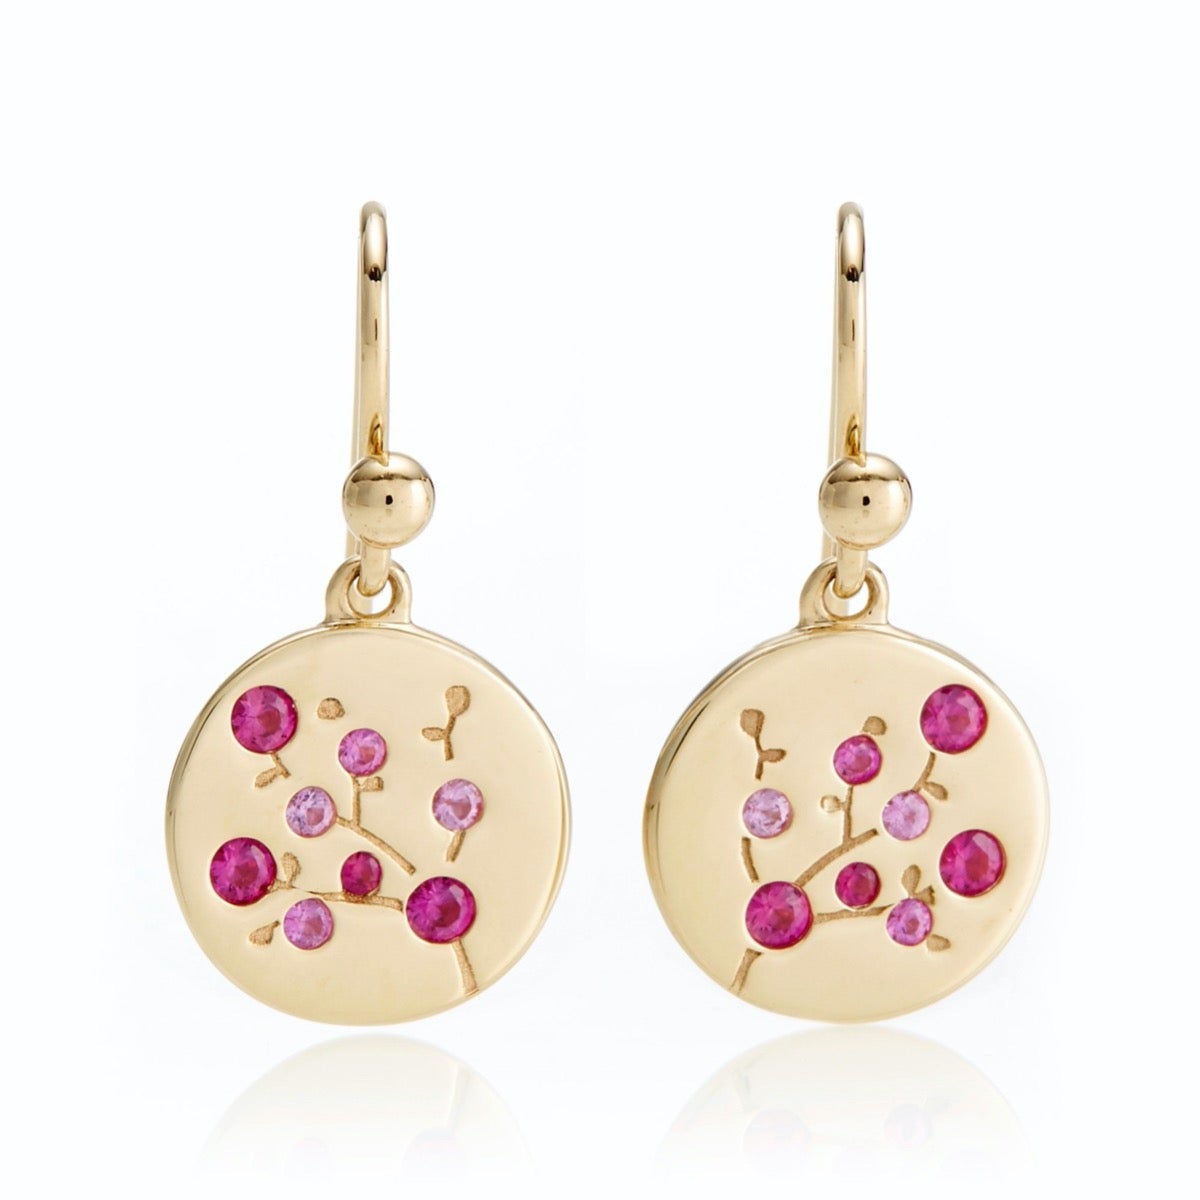 Gump's Signature Pink Sapphire Cherry Blossom Earrings